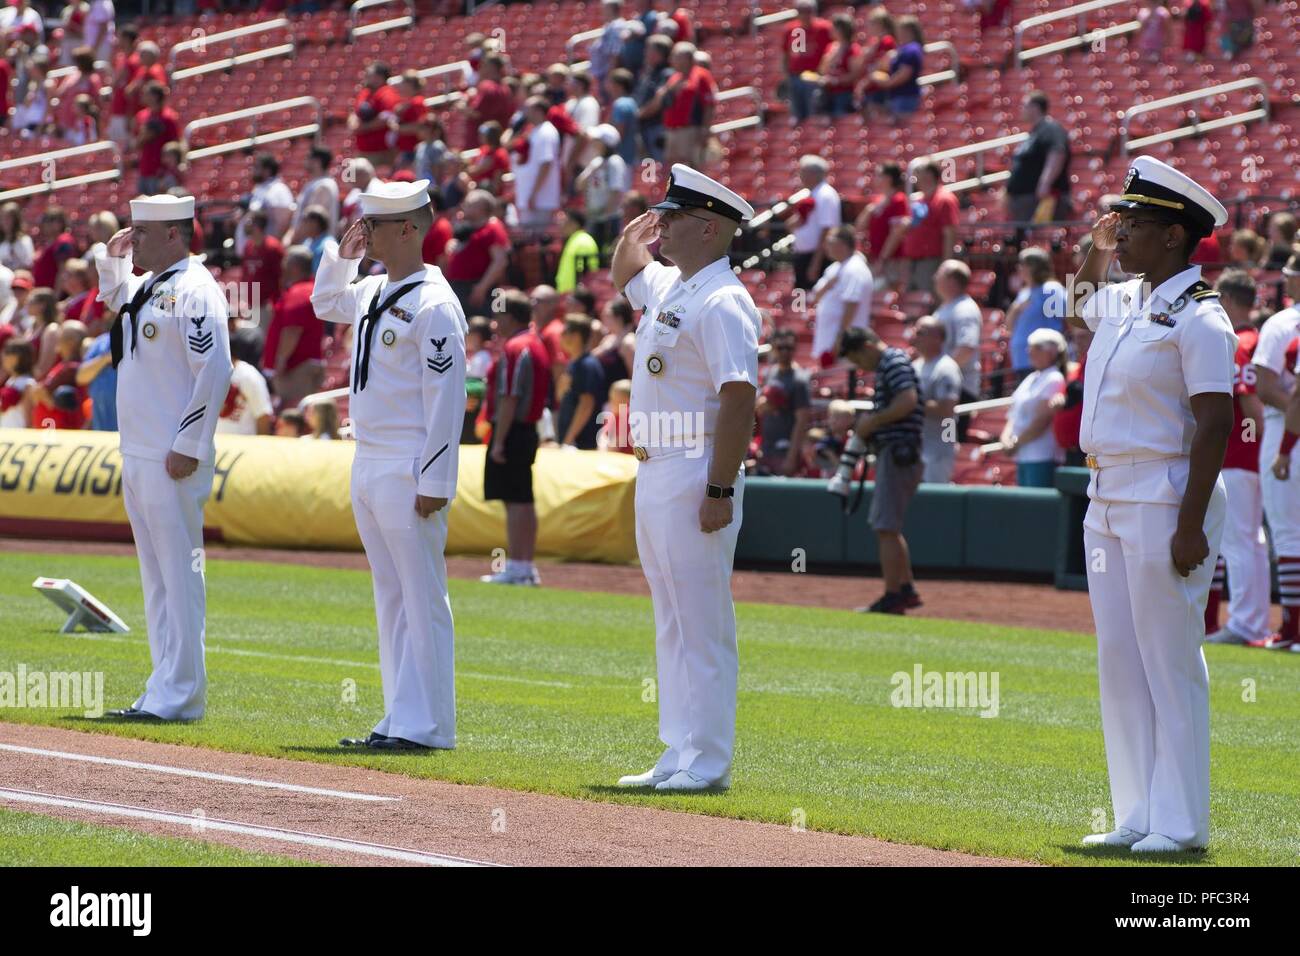 ST. LOUIS (June 7, 2018) – Sailors assigned to Navy Recruiting District St. Louis salute during the playing of the National Anthem at Busch Stadium prior to a baseball game between the St. Louis Cardinals and Miami Marlins. Sailors manned the bases in support of the 60th Cardinal Division pre-game ceremony in which 80 new recruits were sworn into the Navy. The division is named after the St. Louis Cardinals who have sponsored such groups annually since 1958. Stock Photo